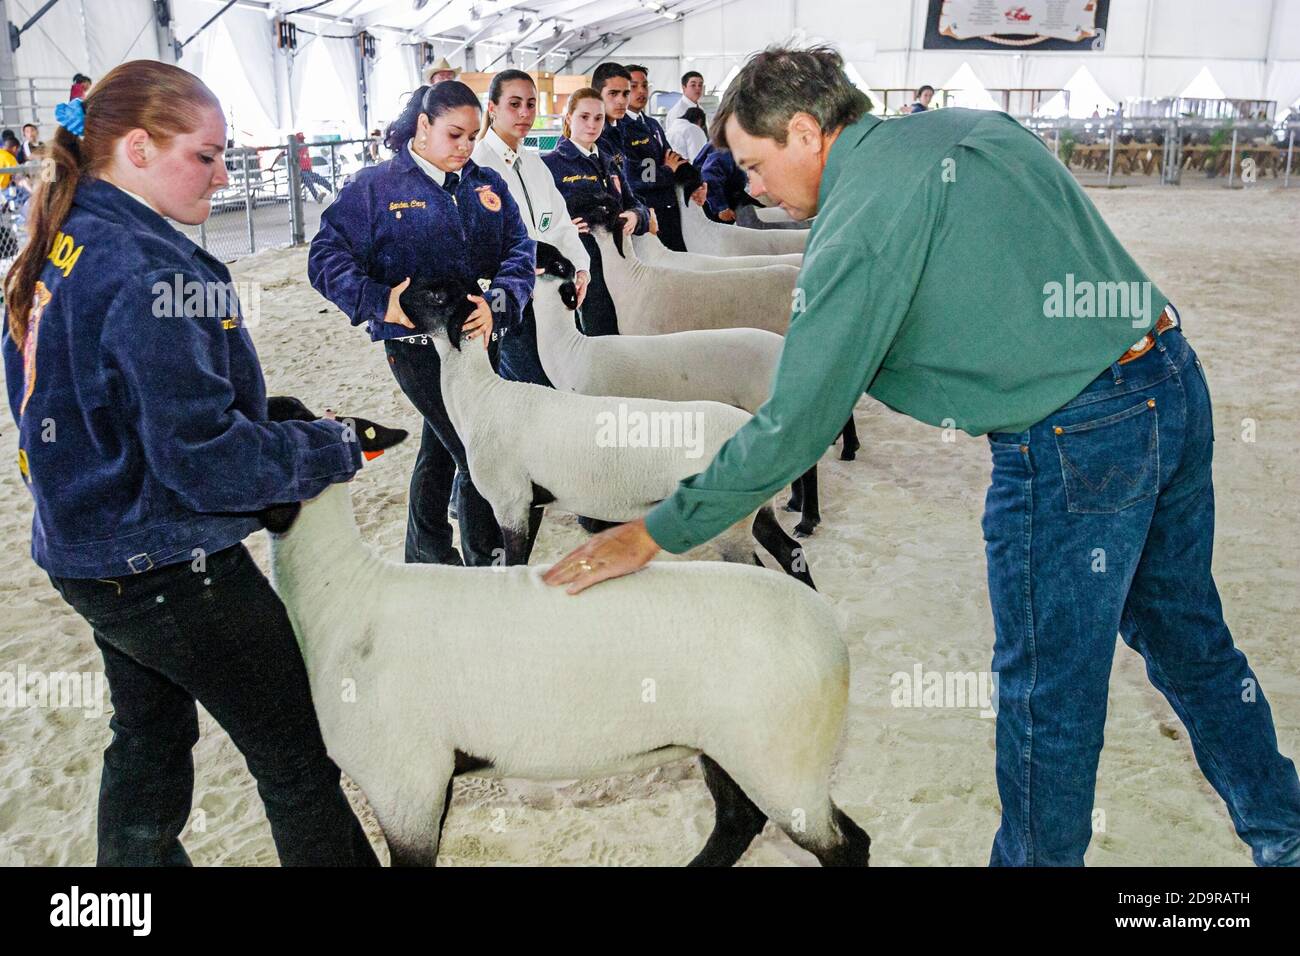 Miami Florida,Dade County Fair & Exposition,annual youth programs animal husbandry agricultural 4-H competition,teen teenage girl student holds holdin Stock Photo